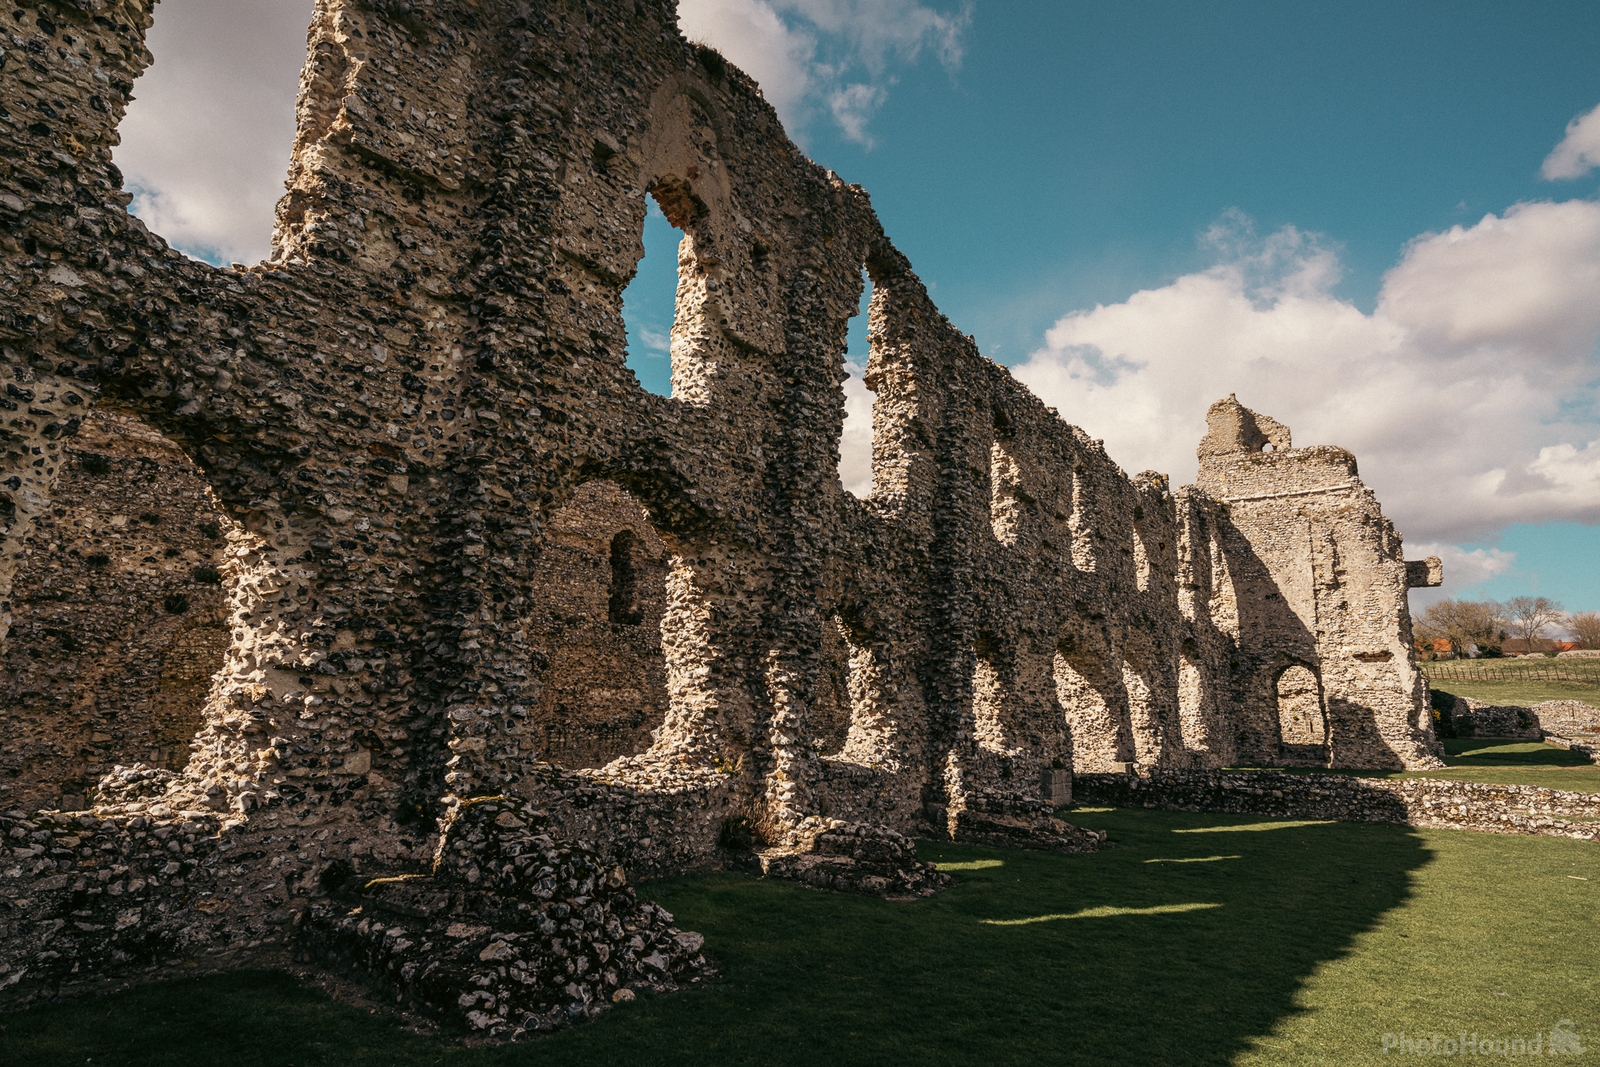 Image of Castle Acre Priory by James Billings.